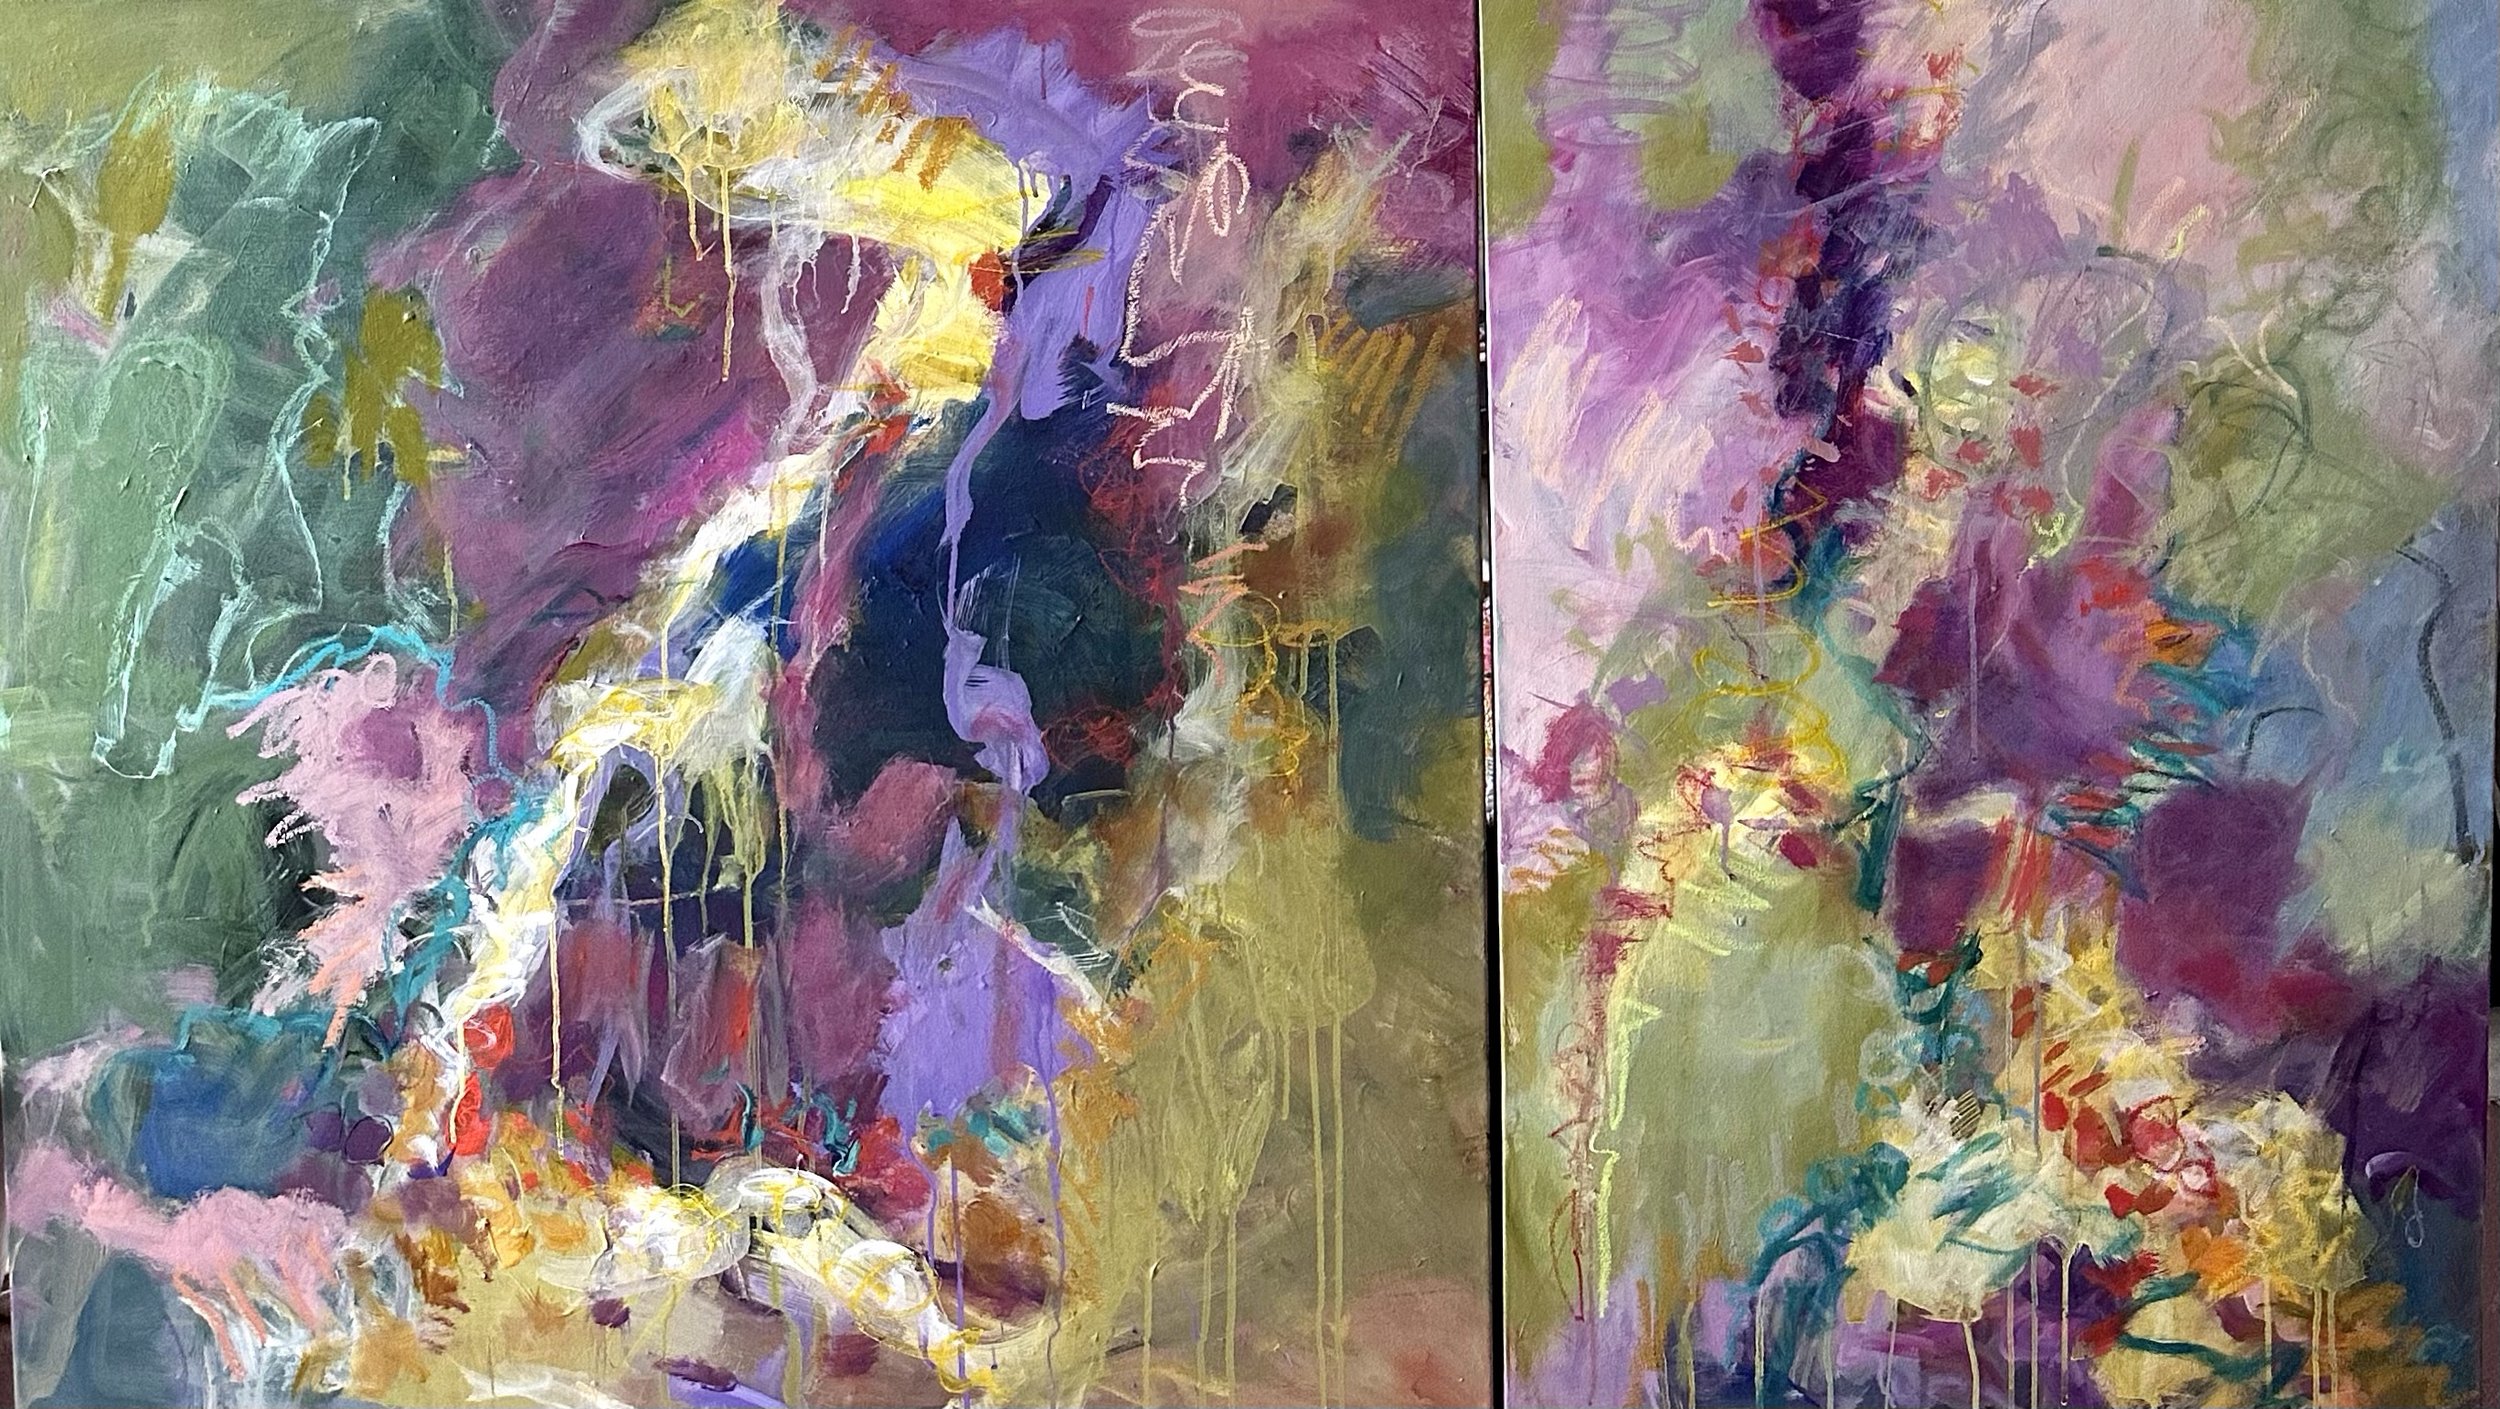   First Breath of Spring No. 1  and  No. 2  (diptych)  Acrylic, pastels, and charcoal on deep canvas, 36x60 inches 